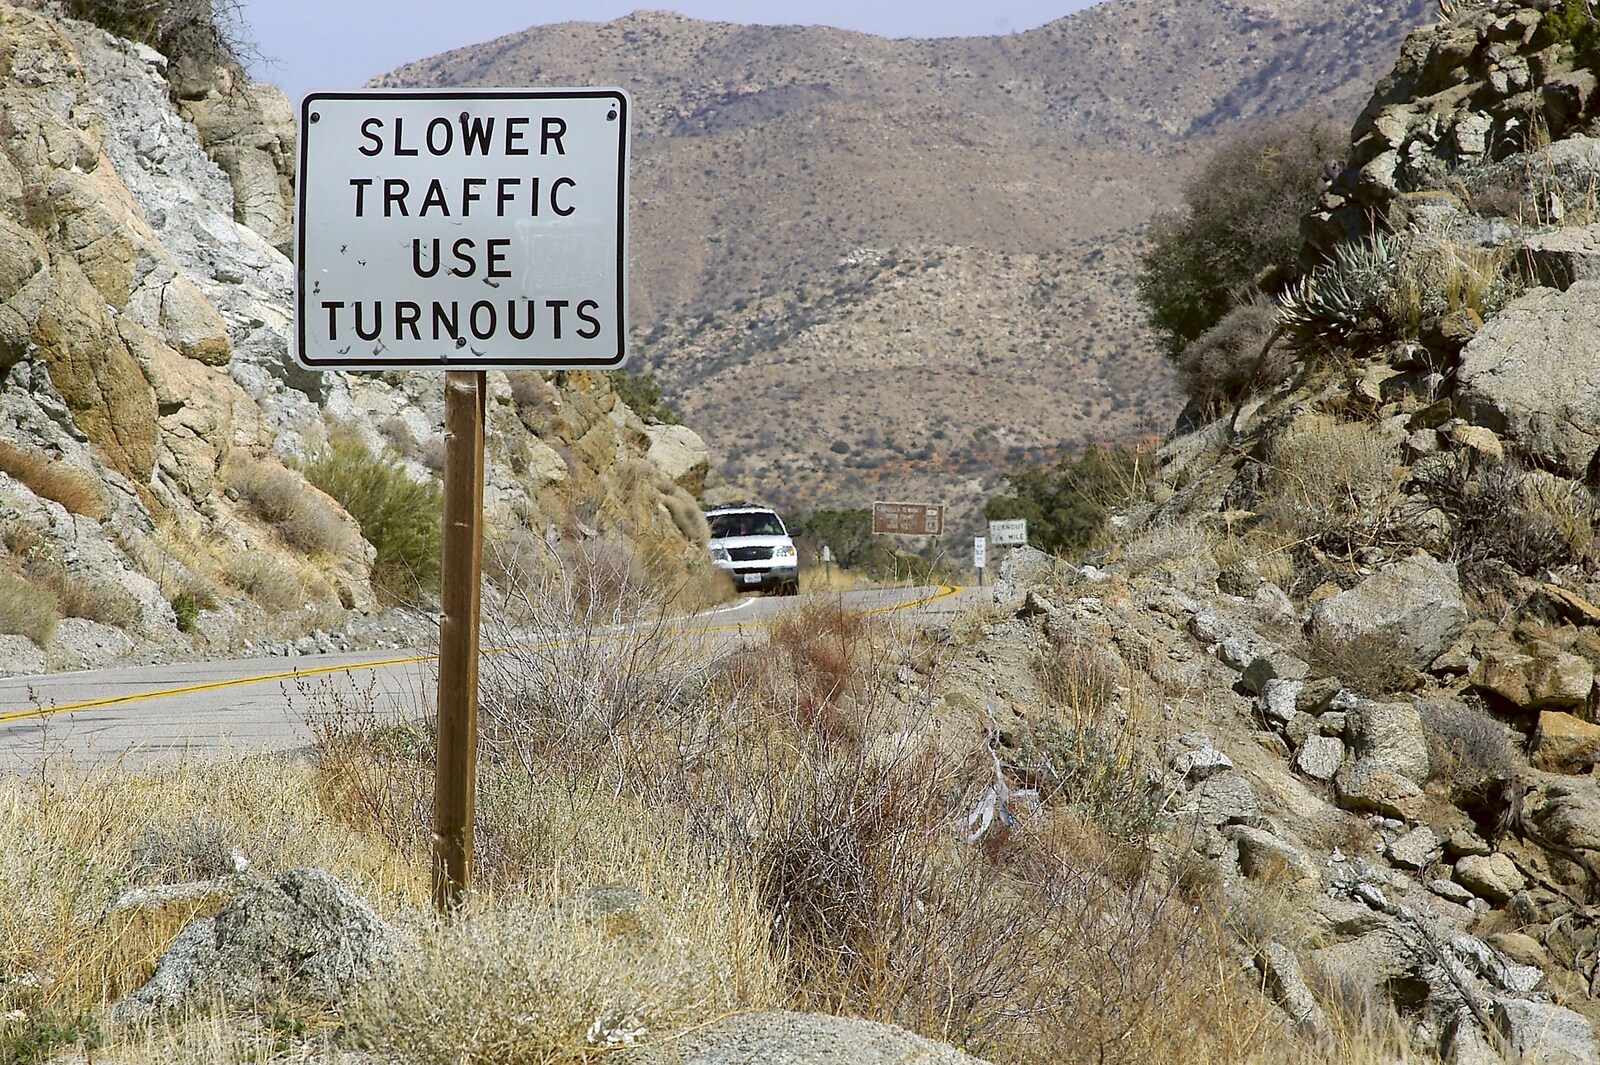 A turnout, aka lay-by from Mojave Desert: San Diego to Joshua Tree and Twentynine Palms, California, US - 5th March 2006